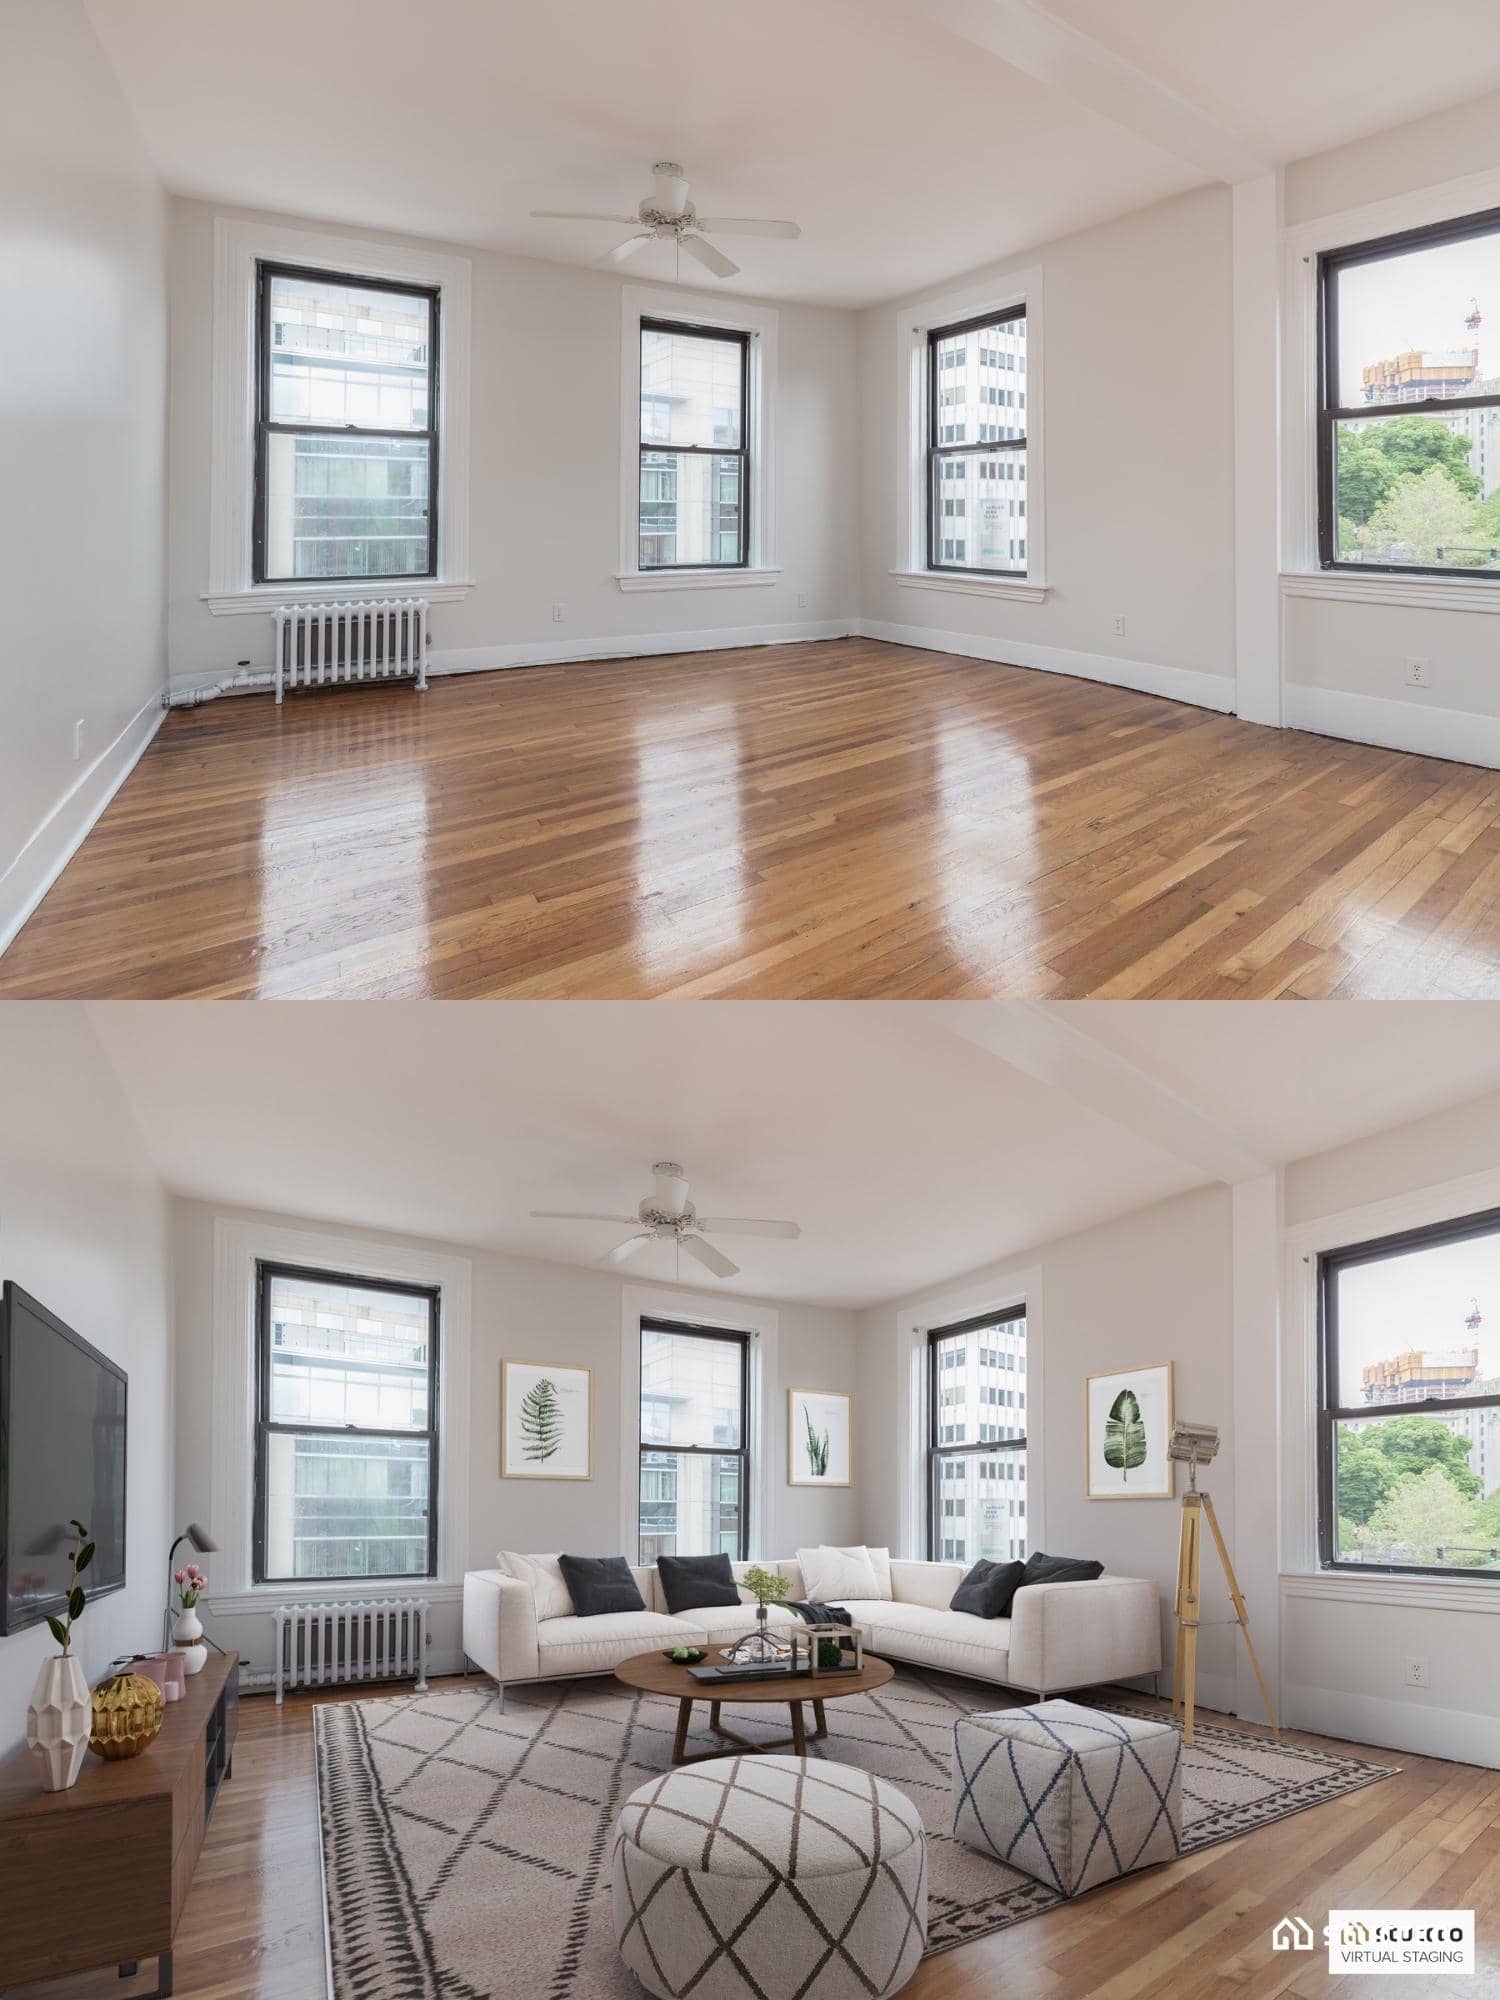 Before and after virtual staging service for real estate businesses